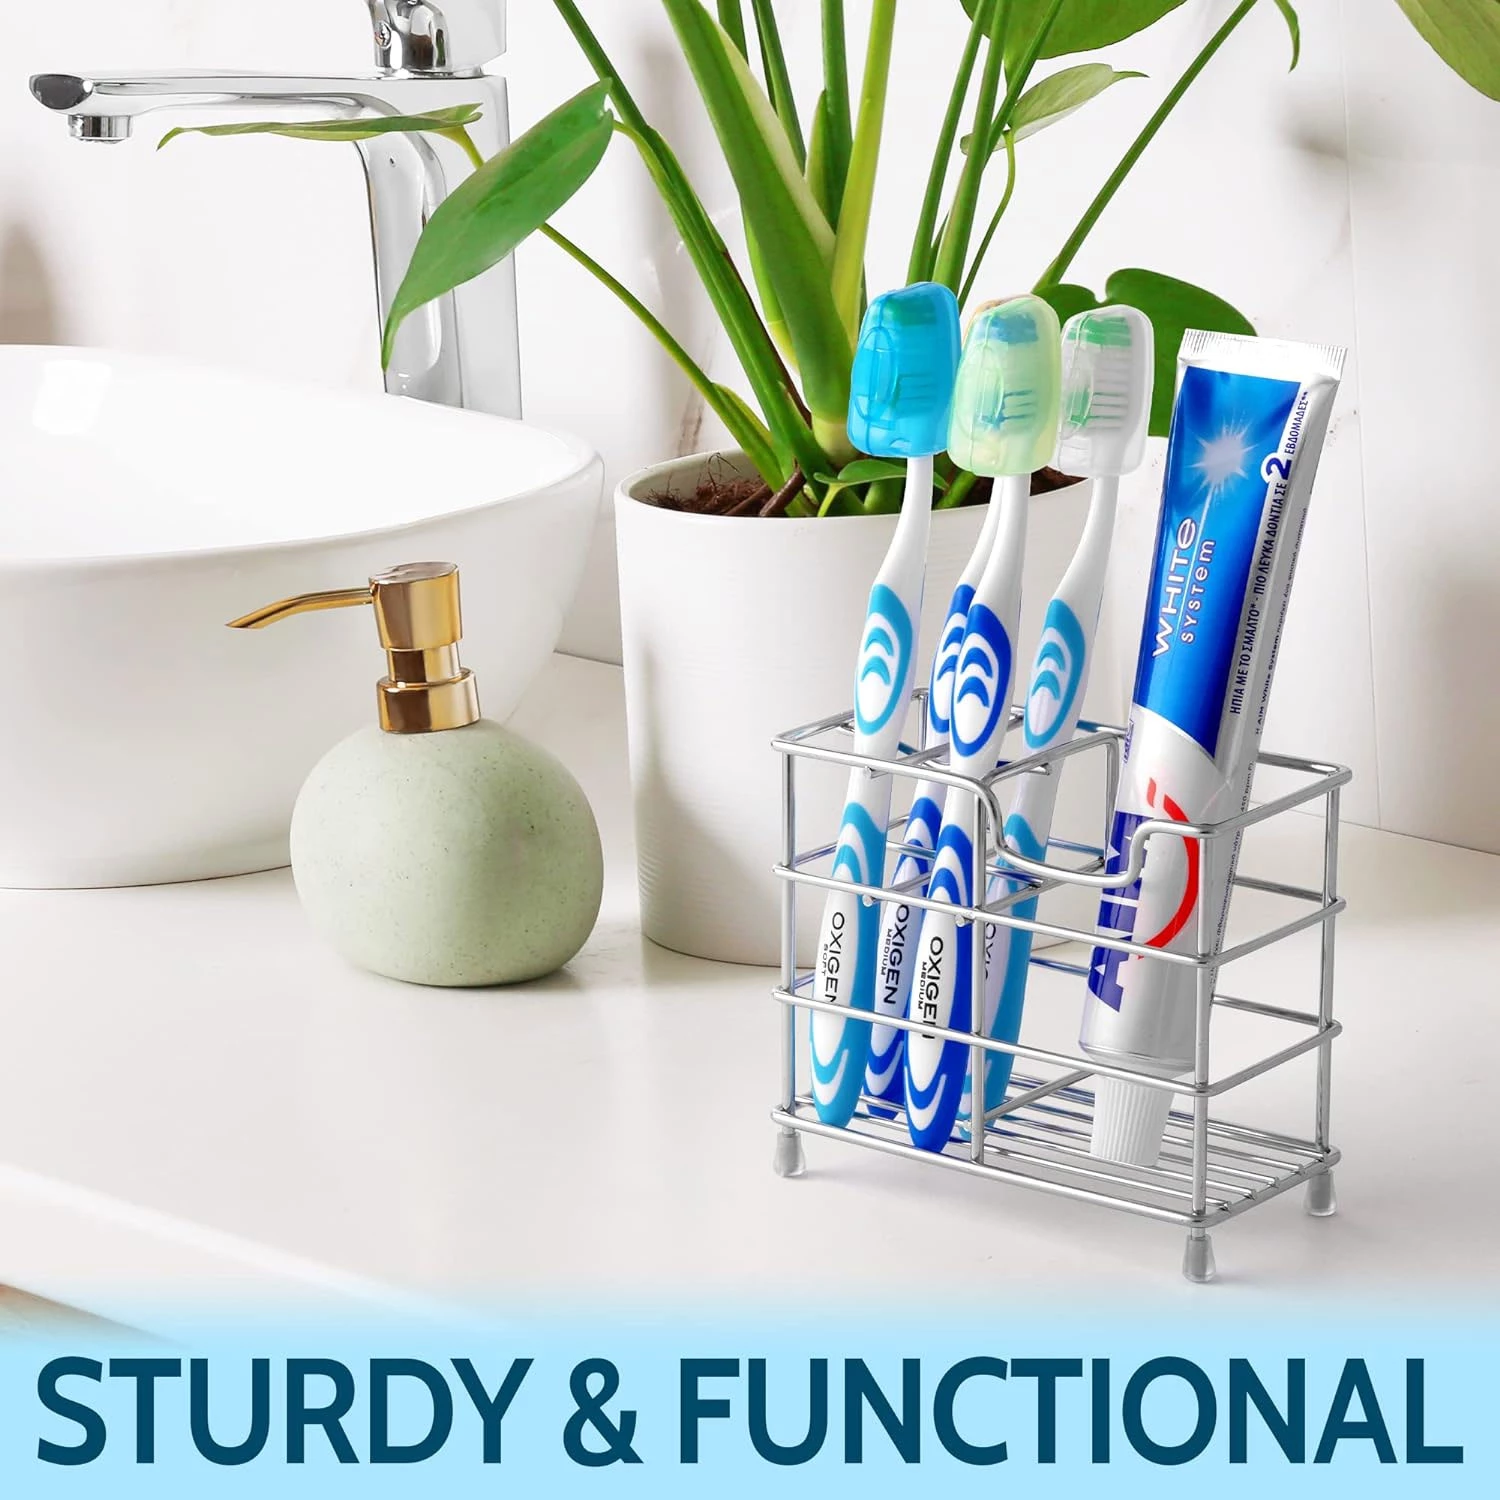 ZH Toothpaste and Toothbrush Holder - Stainless Steel